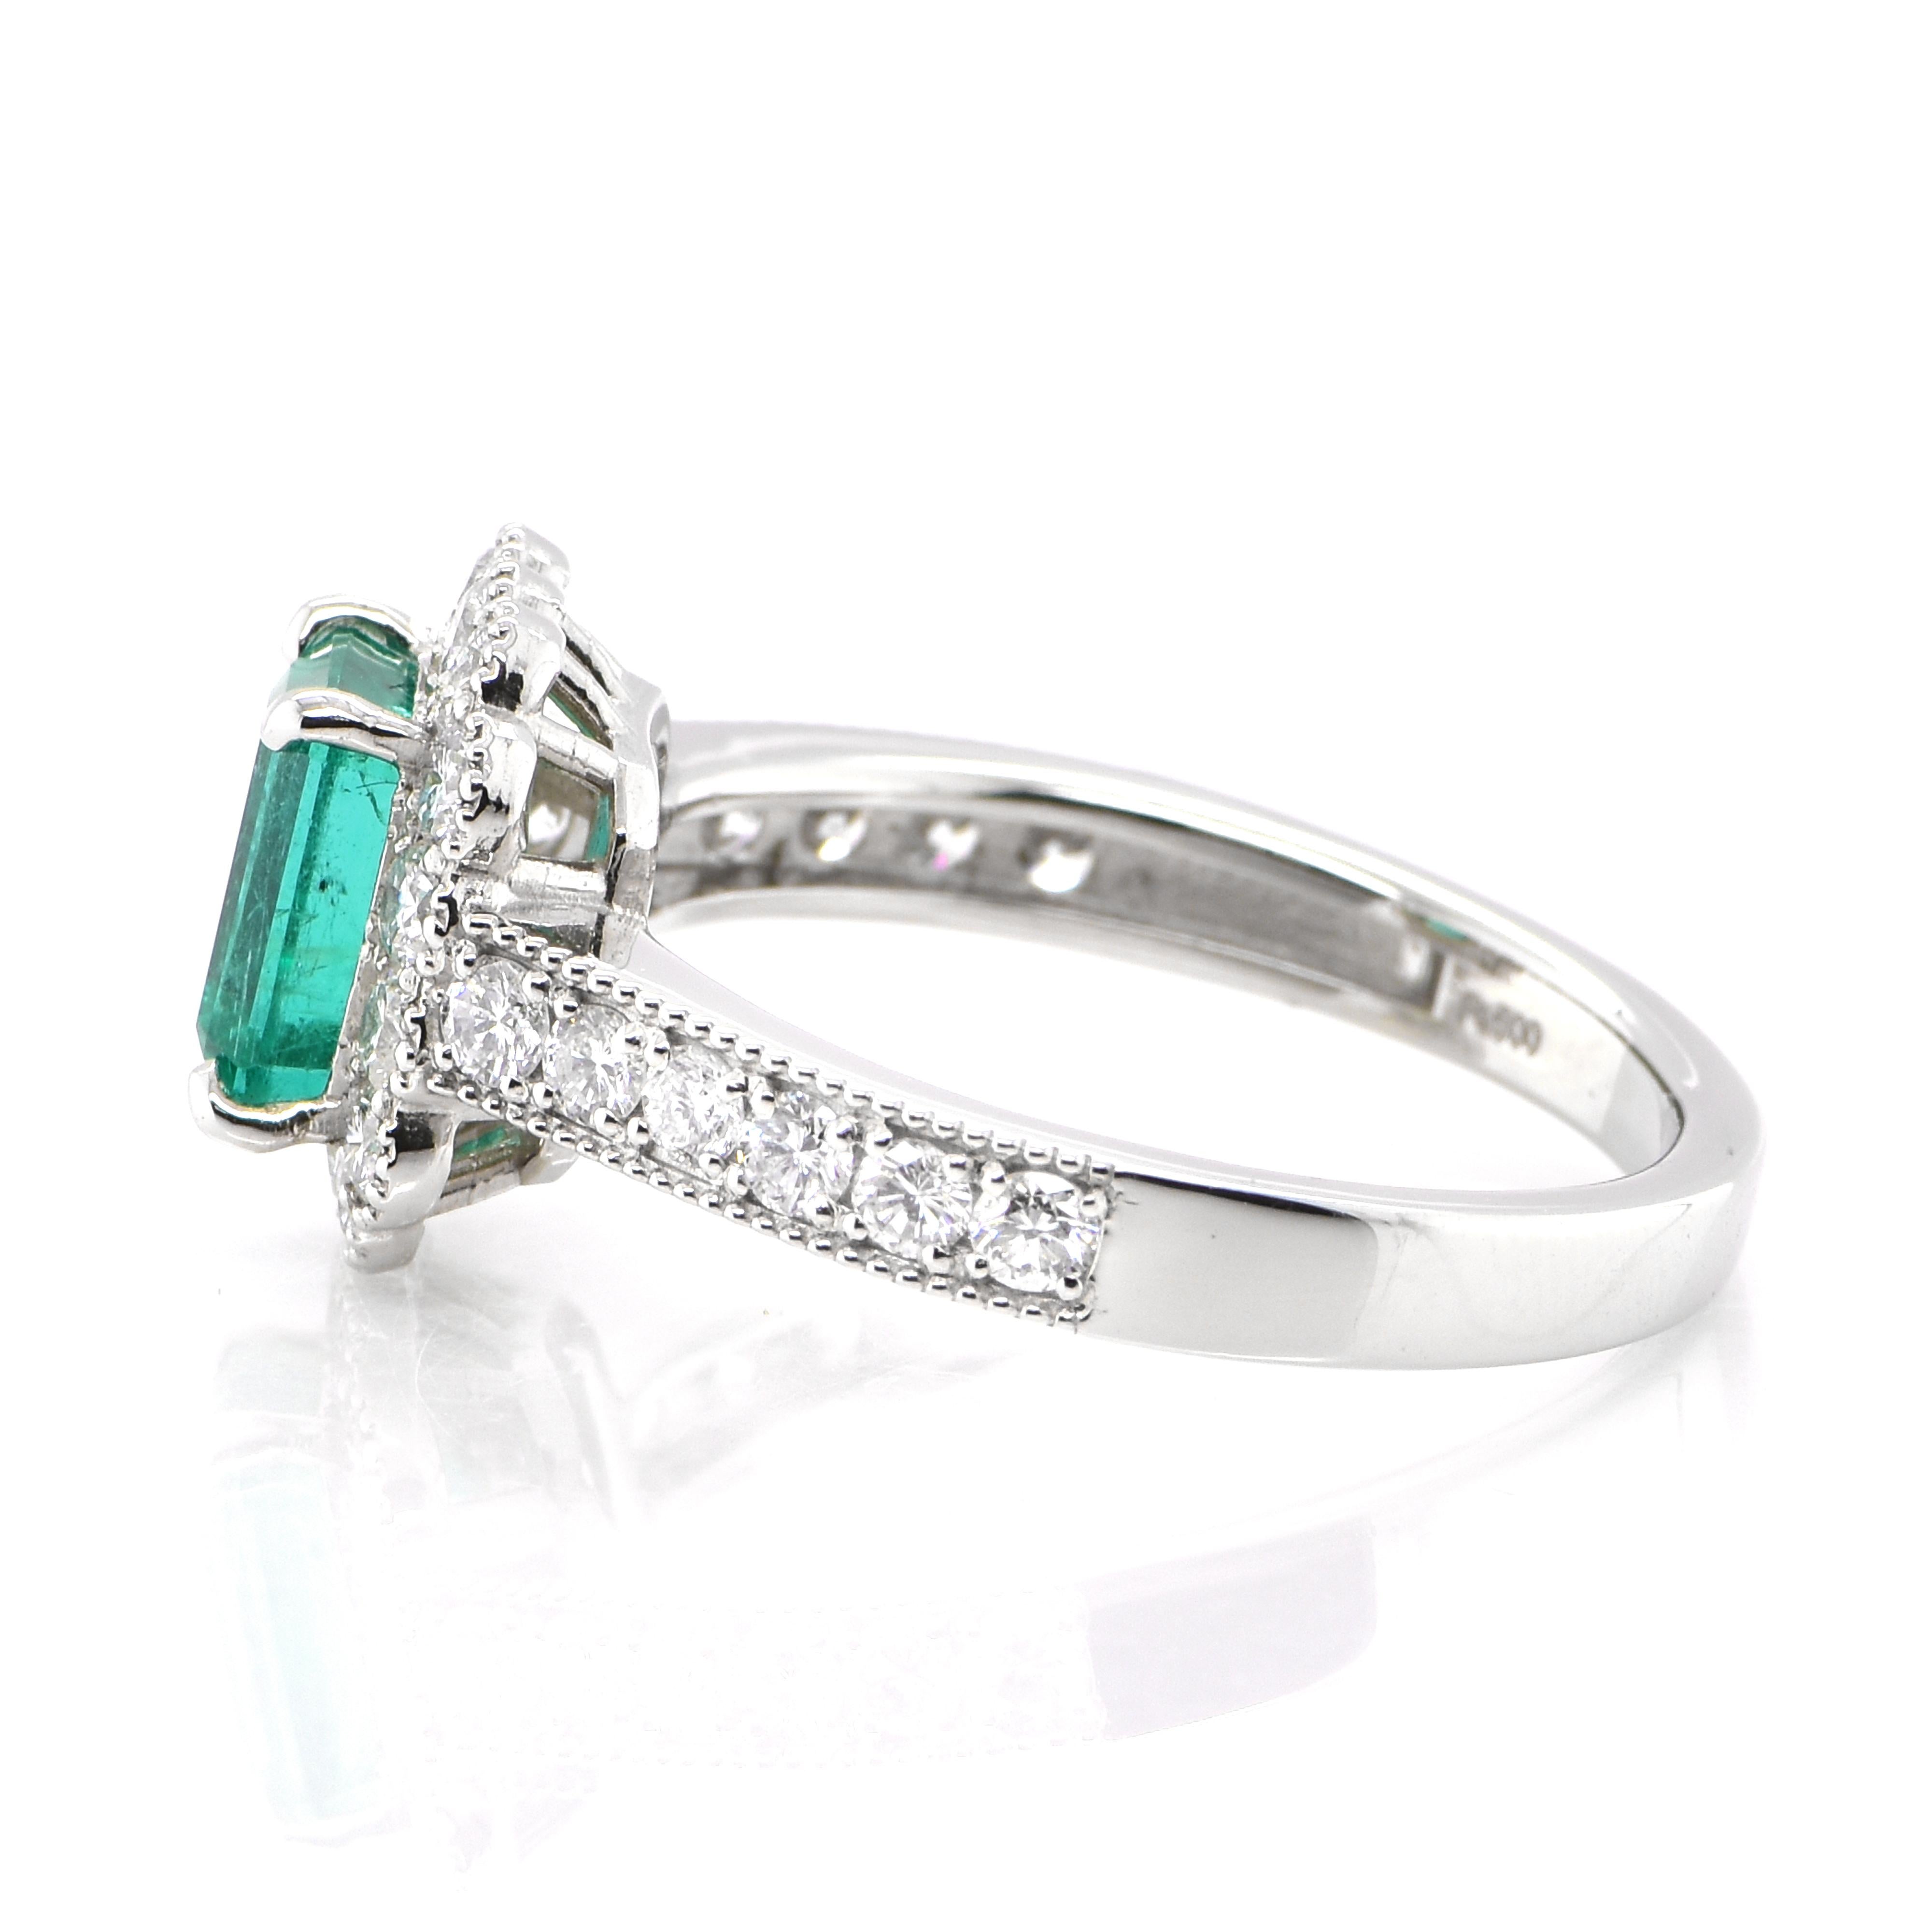 Emerald Cut 1.47 Carat Natural Colombian Emerald and Diamond Ring Set in Platinum For Sale